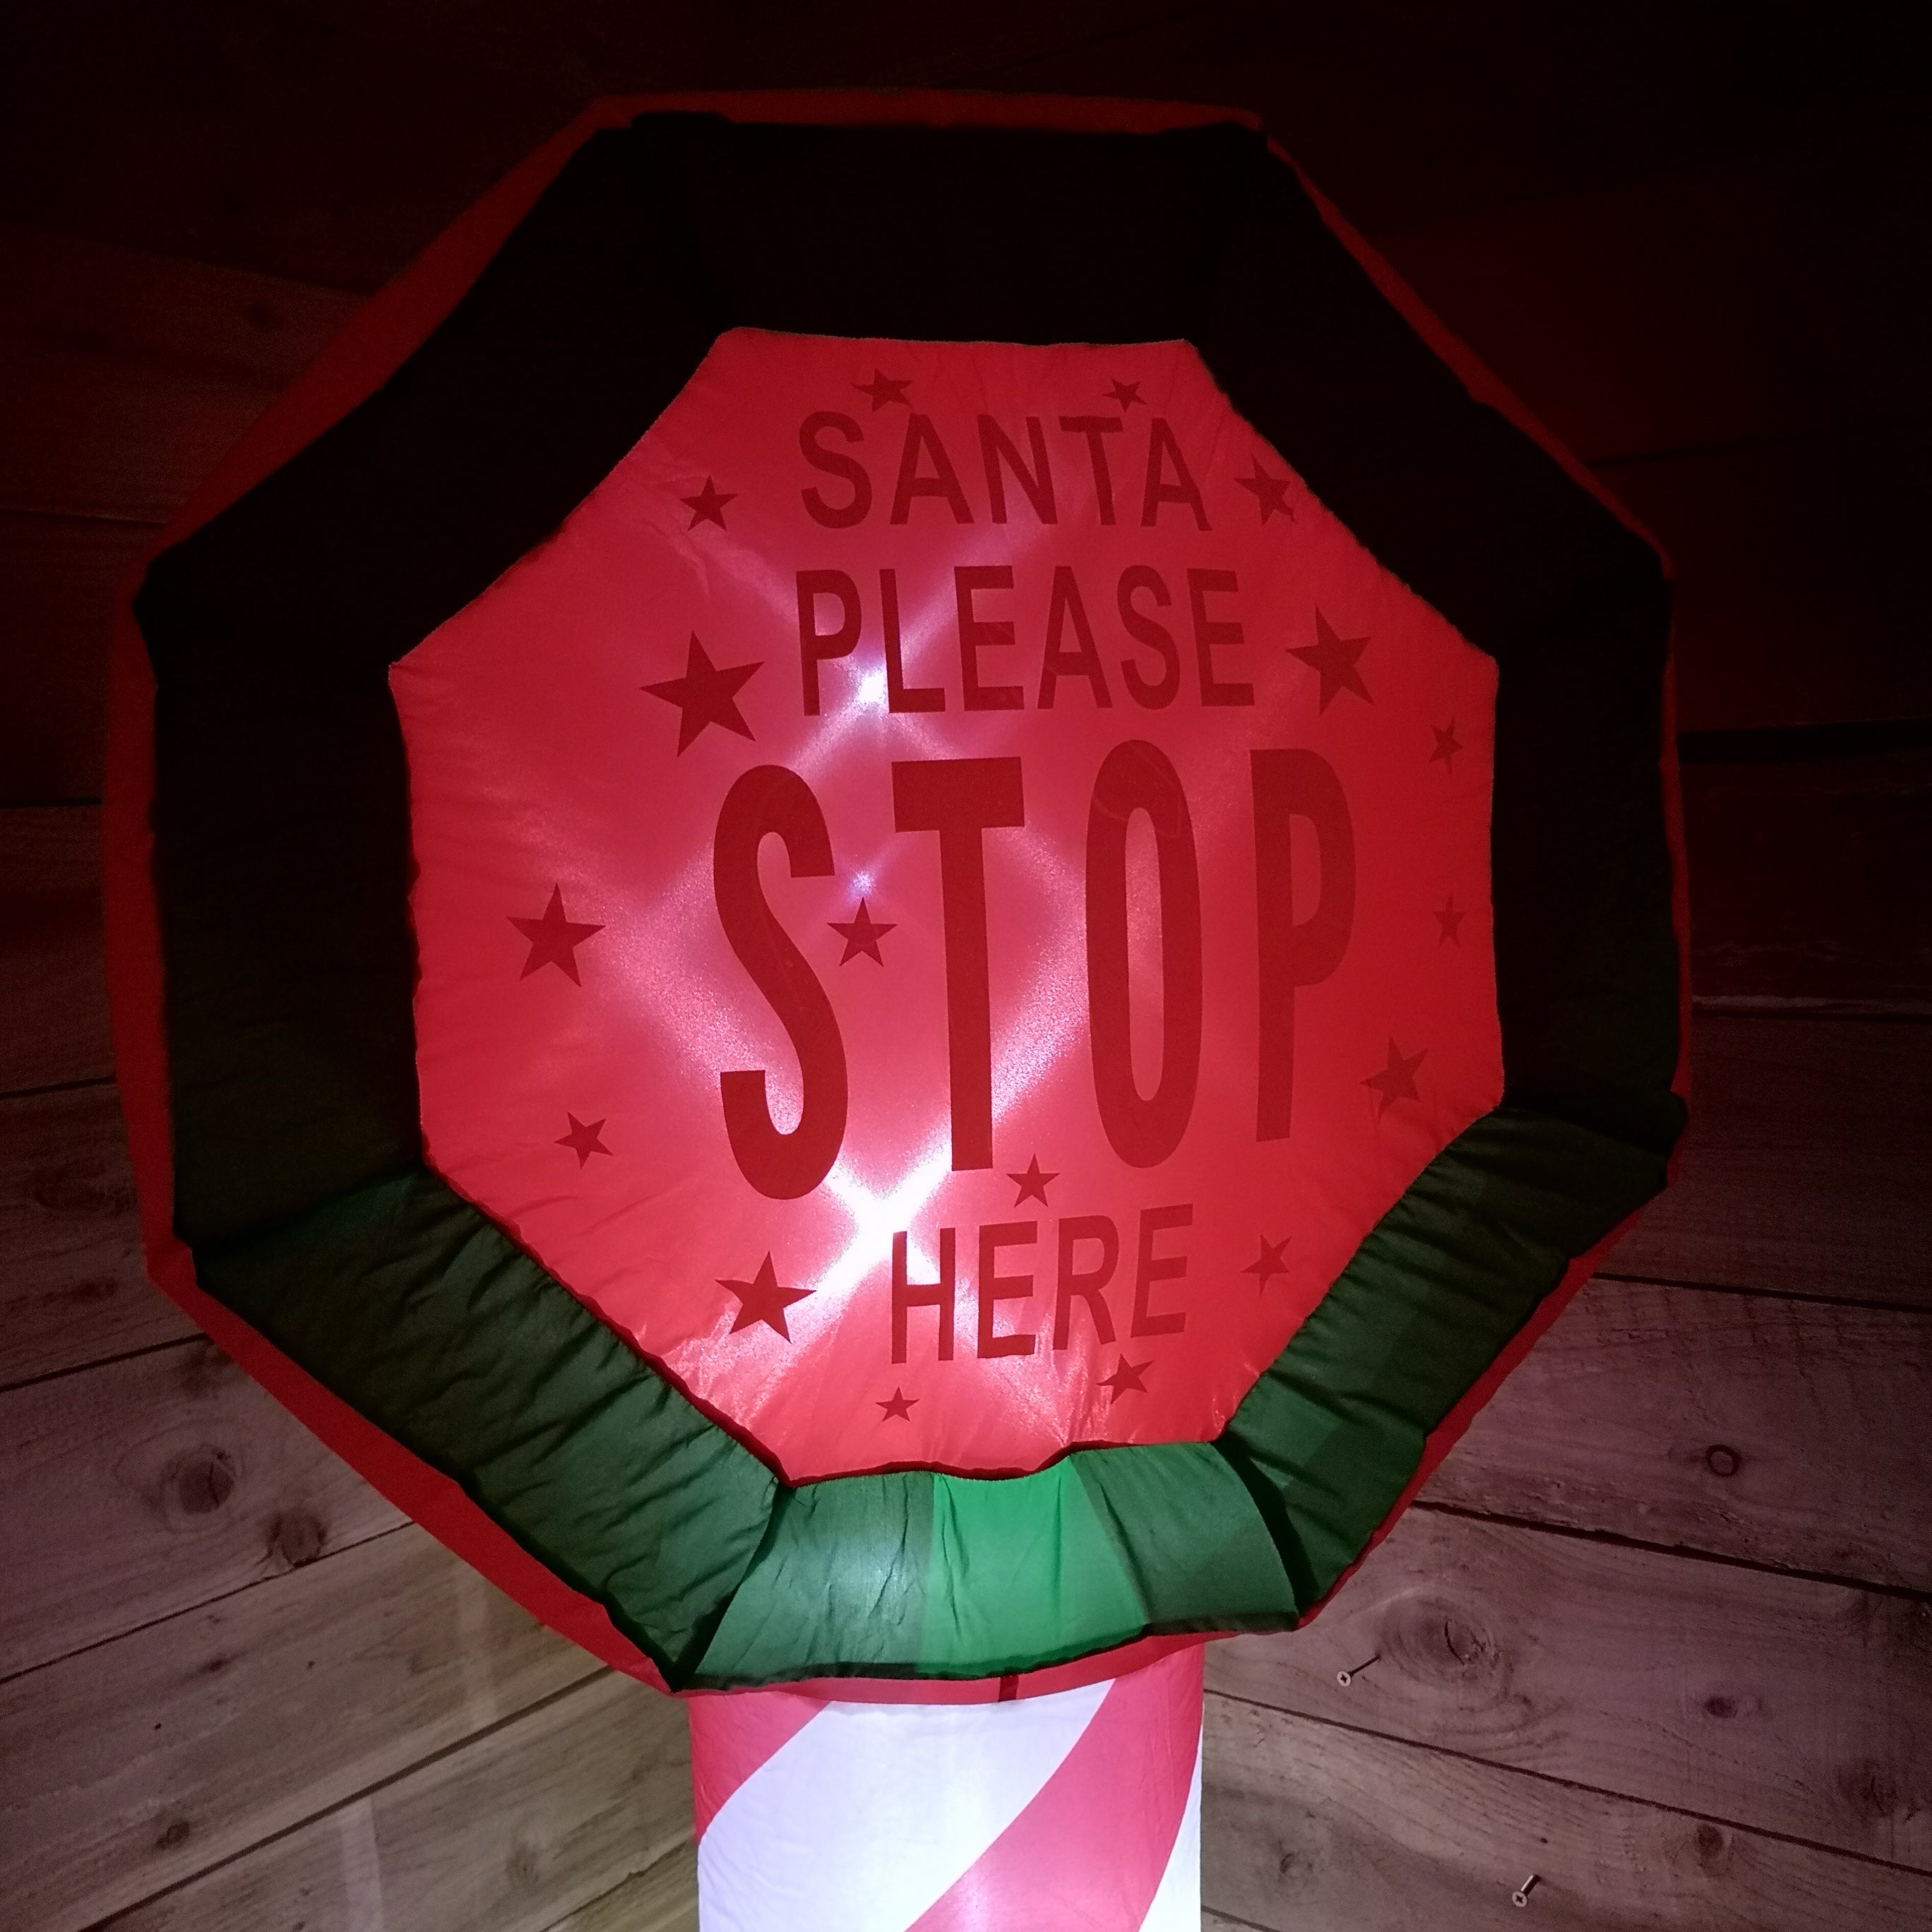 6ft (1.8m) Indoor Outdoor Inflatable LED Lit Santa Stop Here Christmas Sign